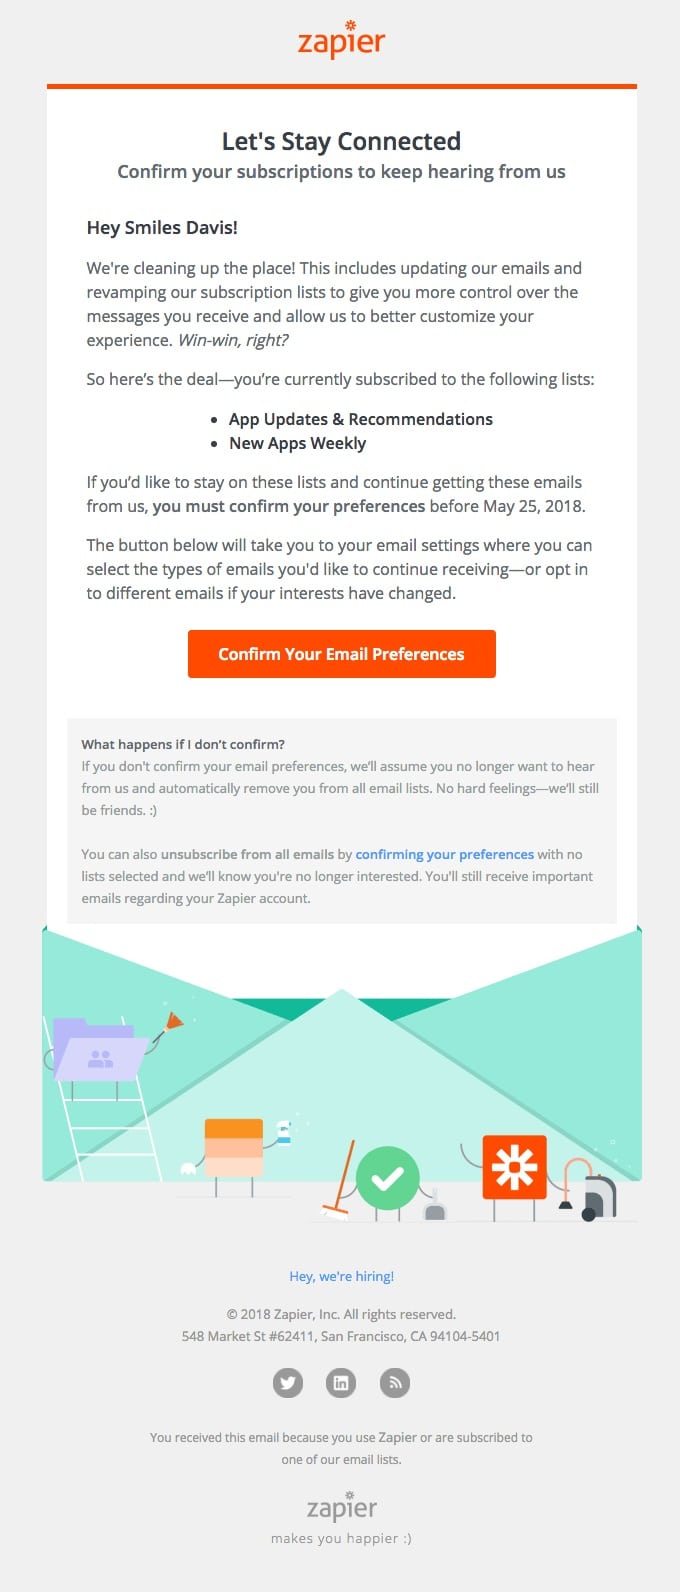 Zapier's email marketing also uses tactics you can borrow to grow your small business' email list.